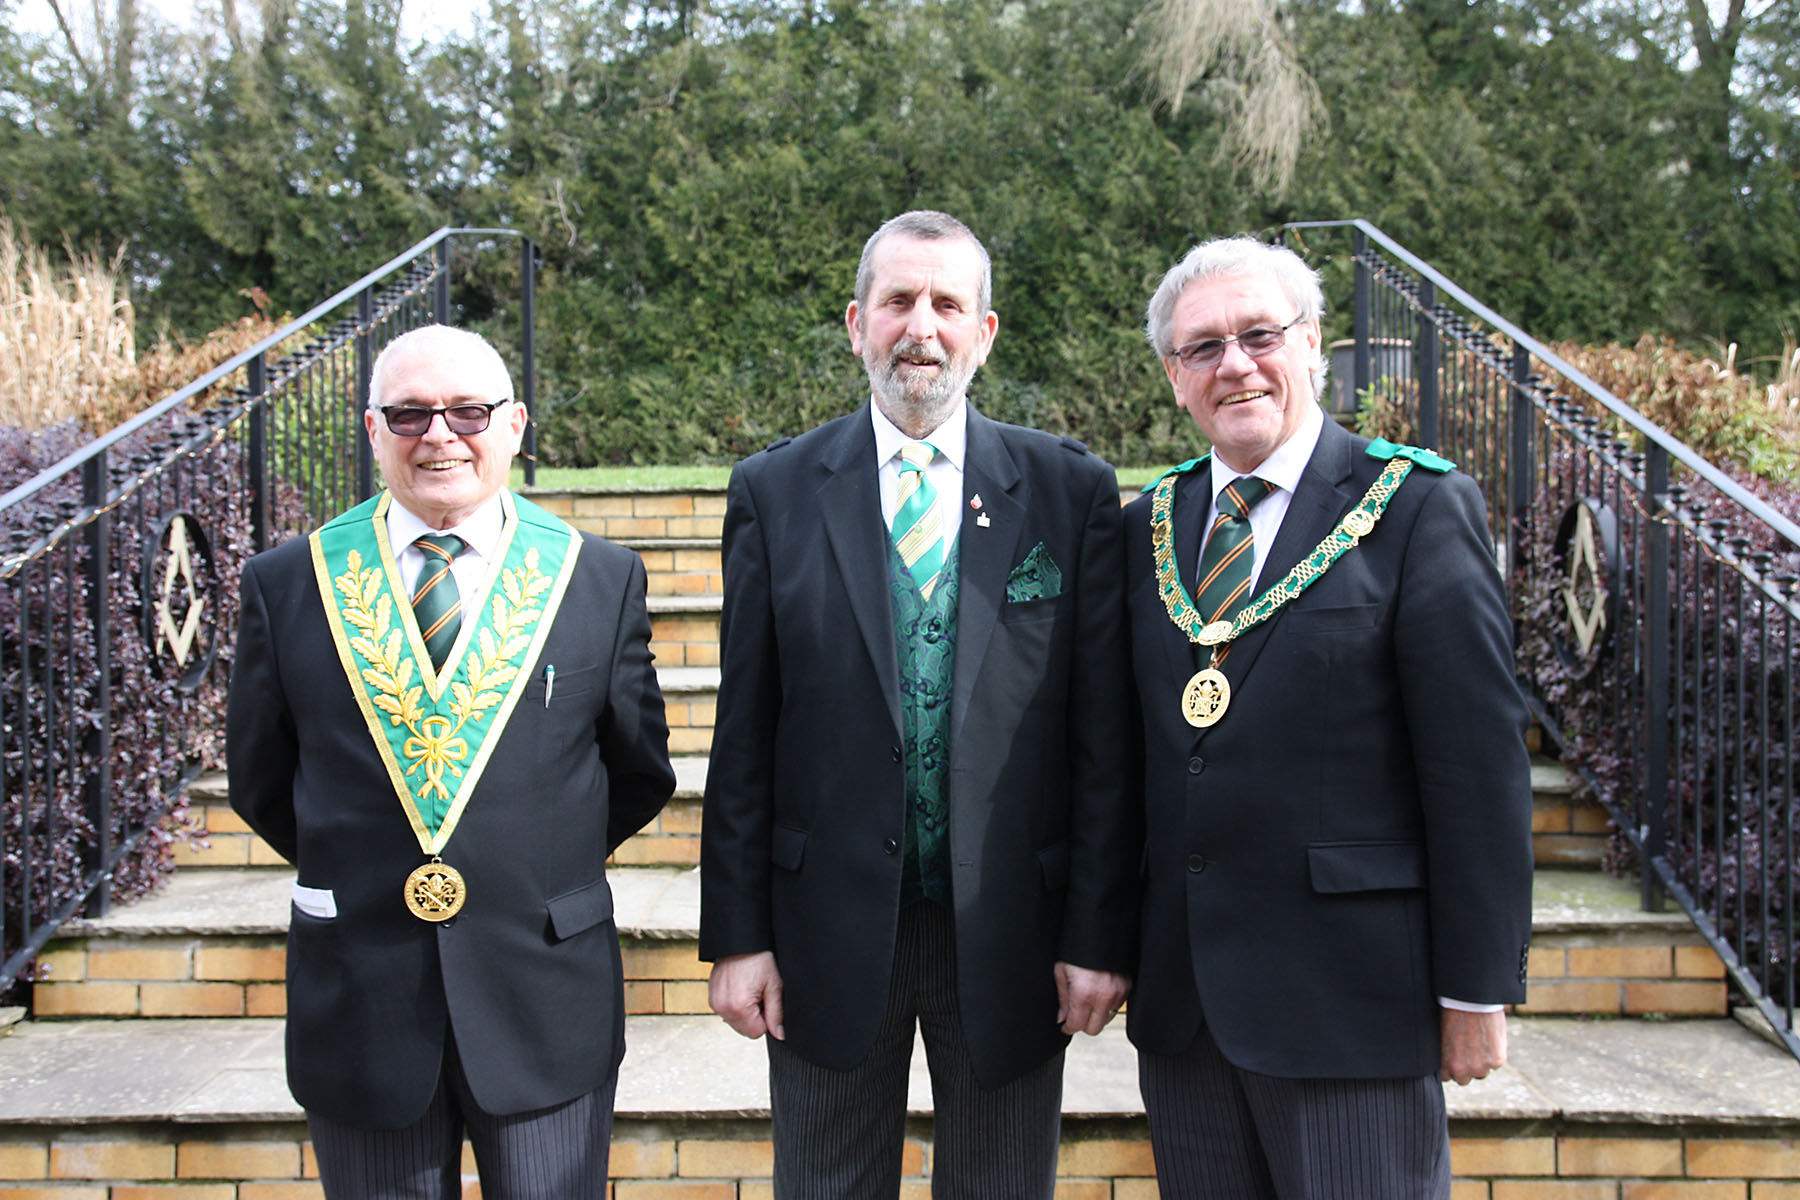 Representatives from Kent attend the Consecration of a new Council in East Anglia